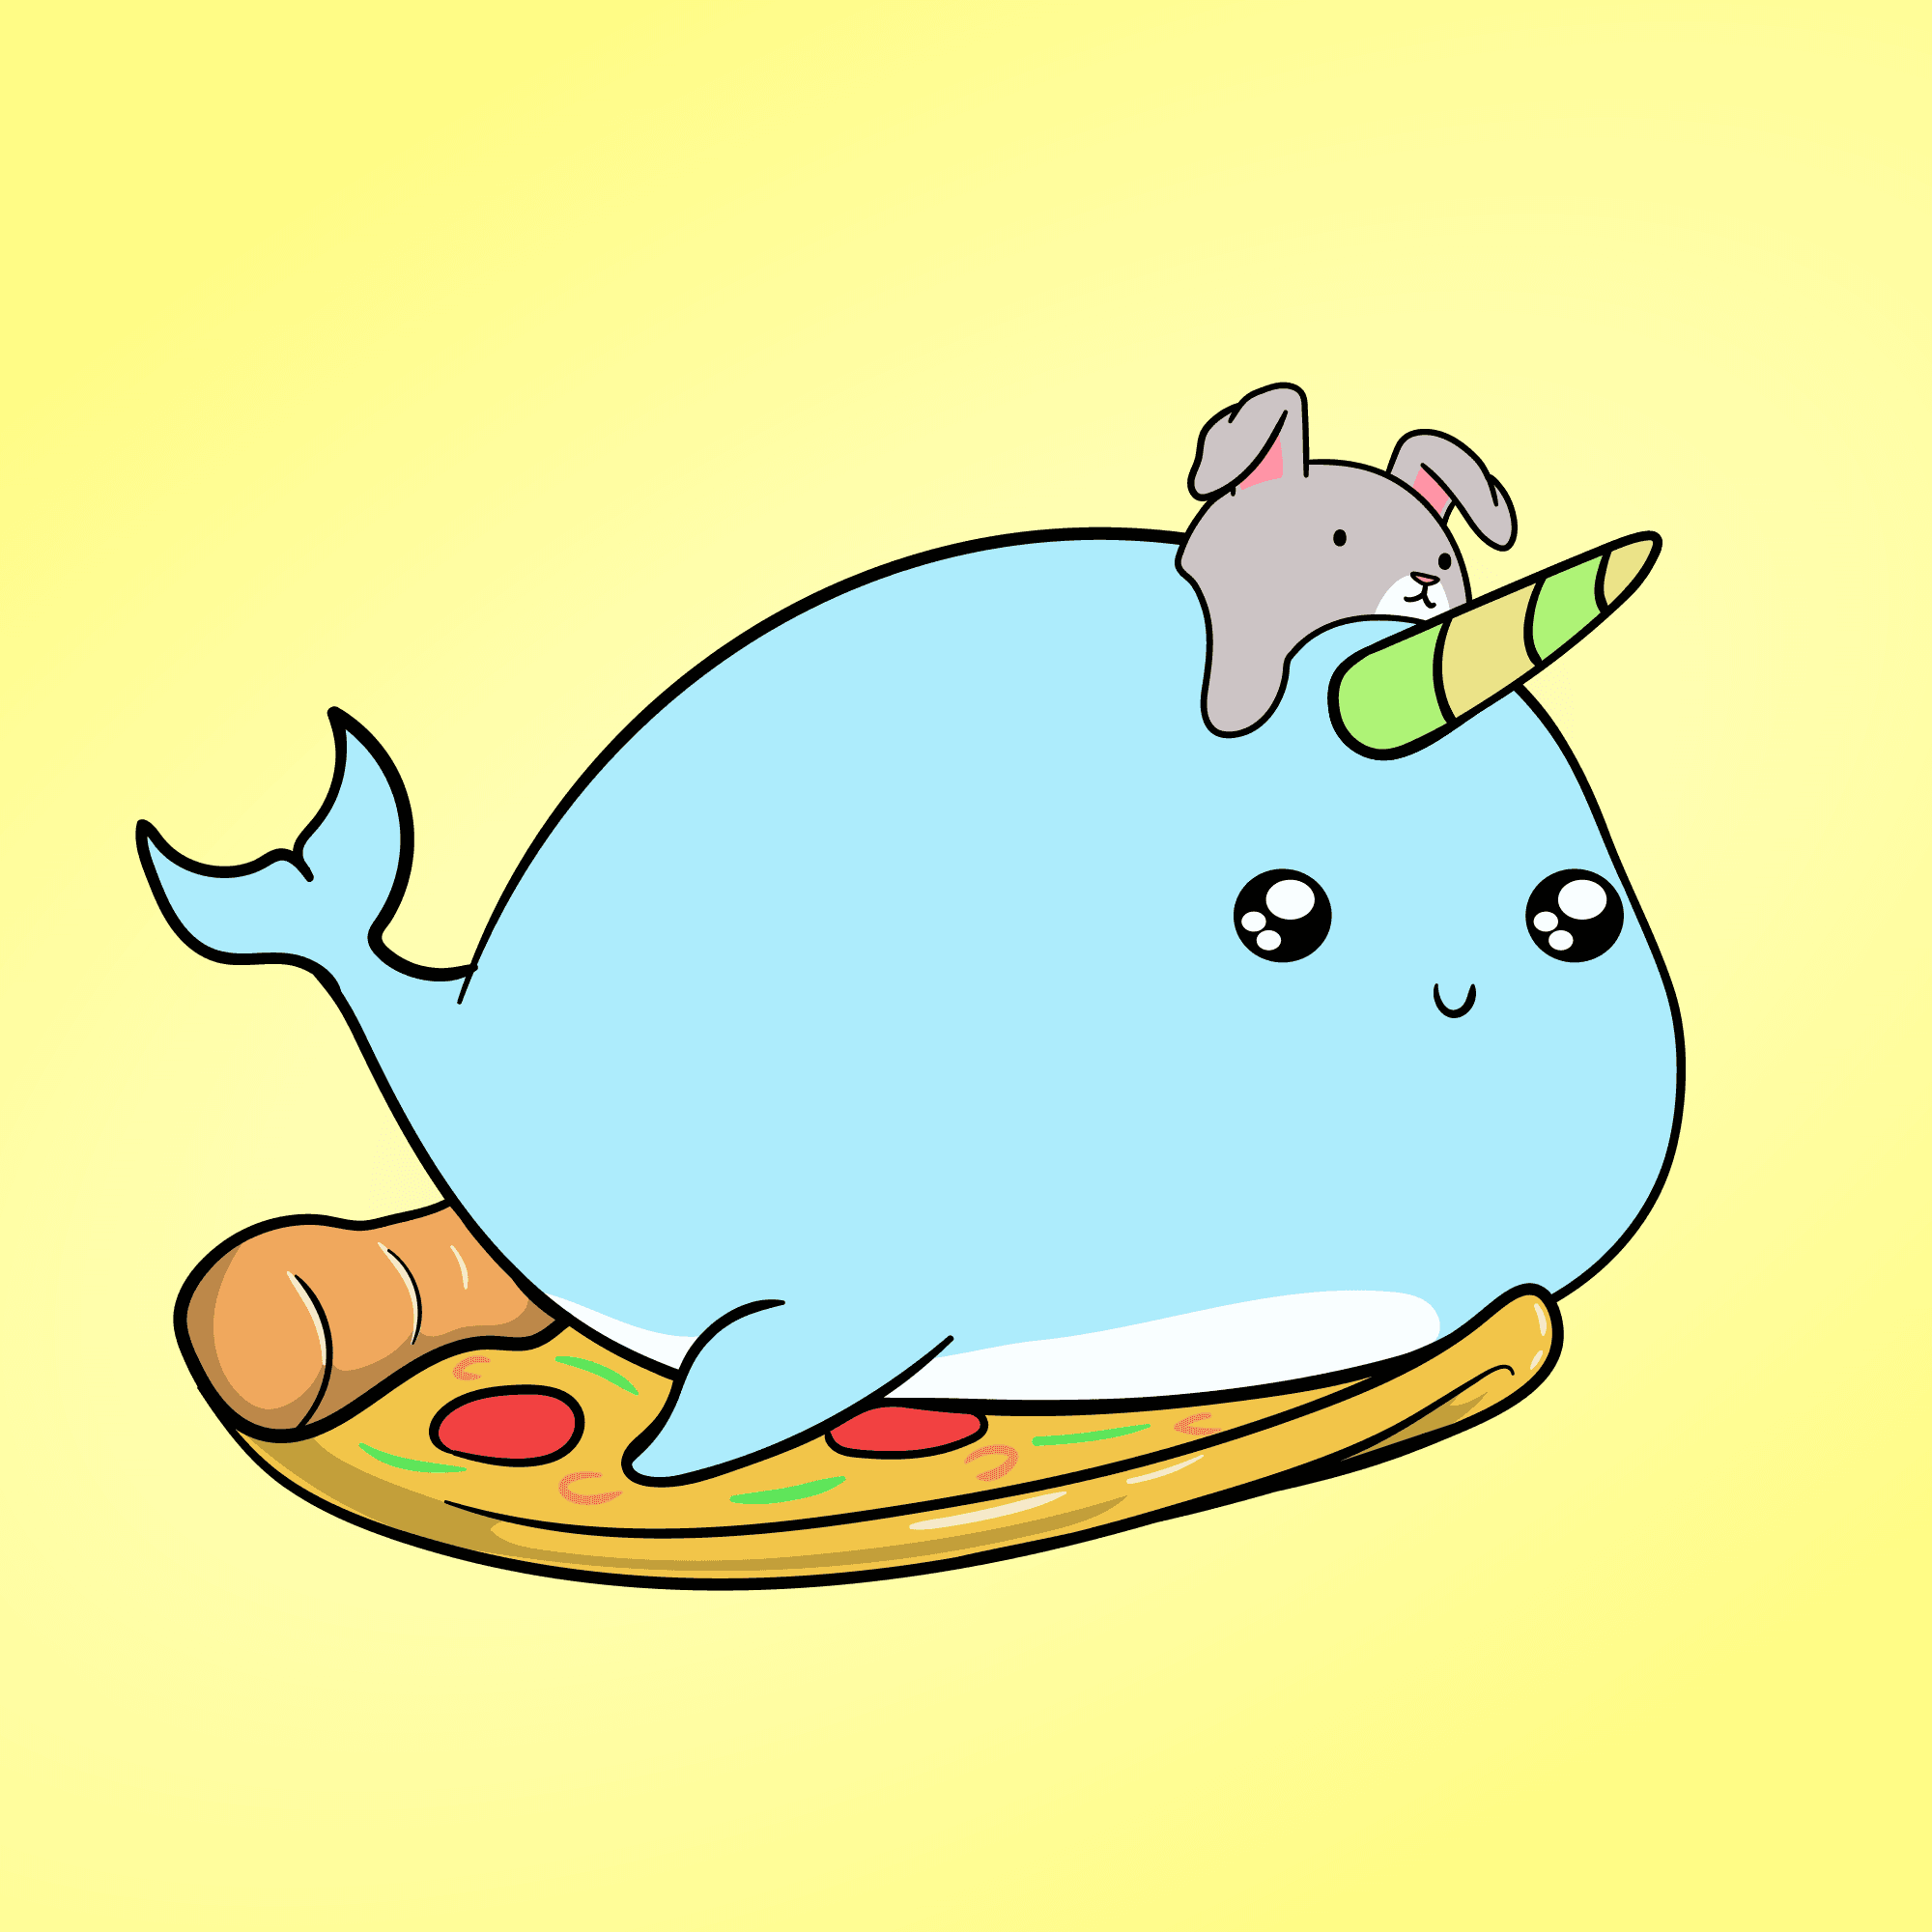 Pizzawhal (#1179)